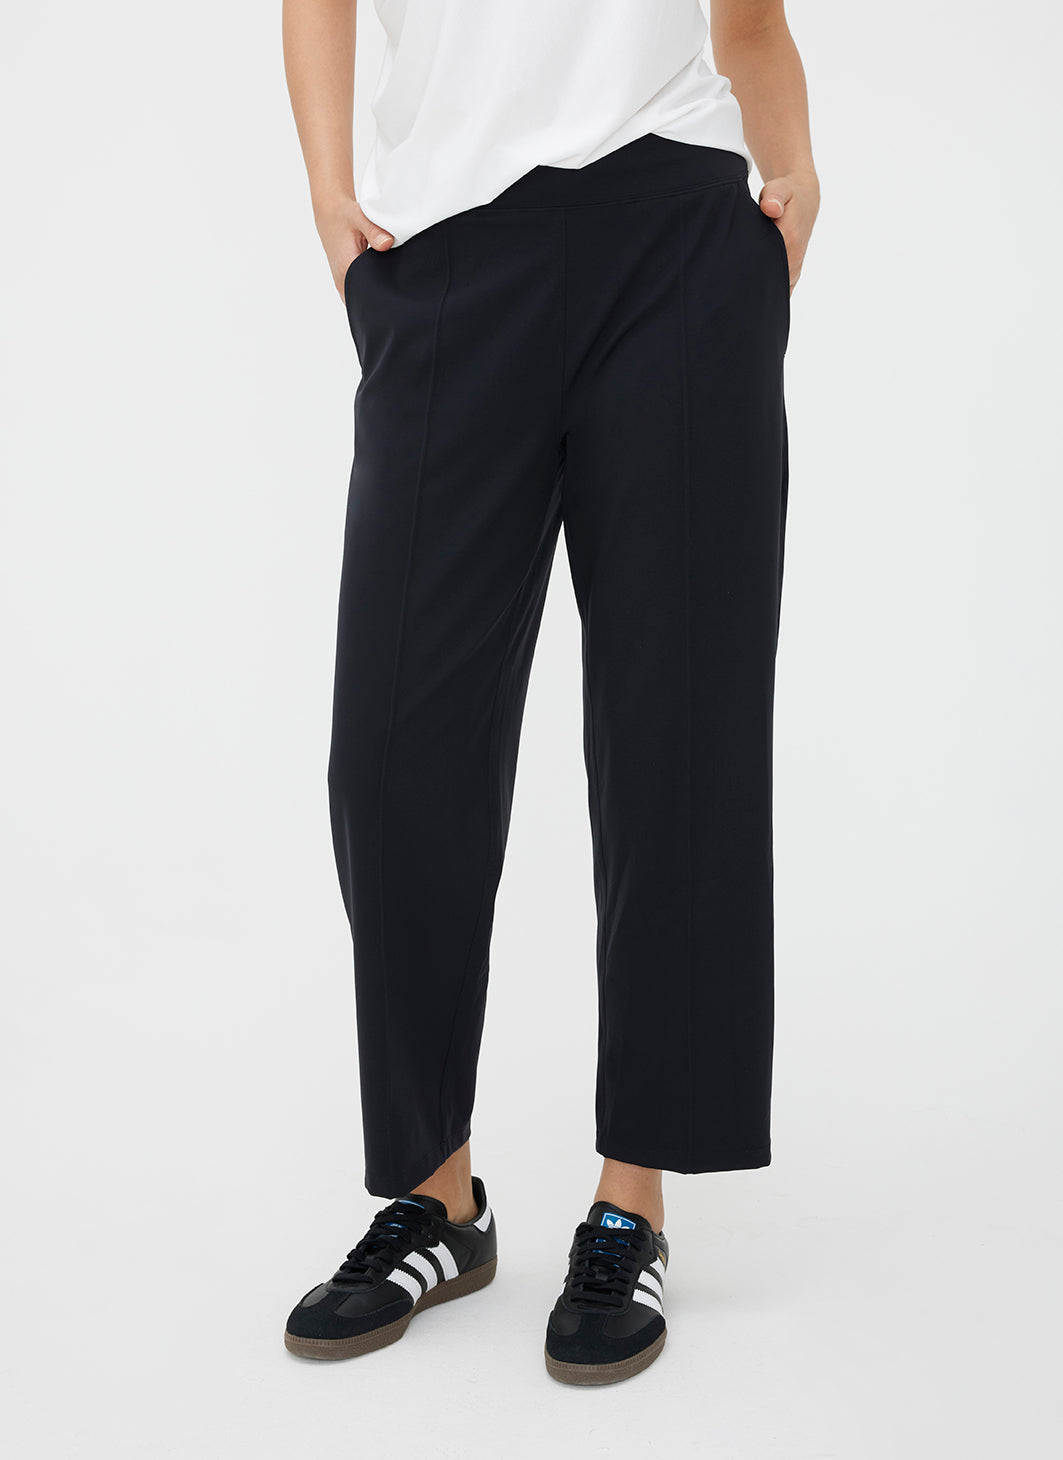 On Repeat Pants  Women's Pants – Kit and Ace